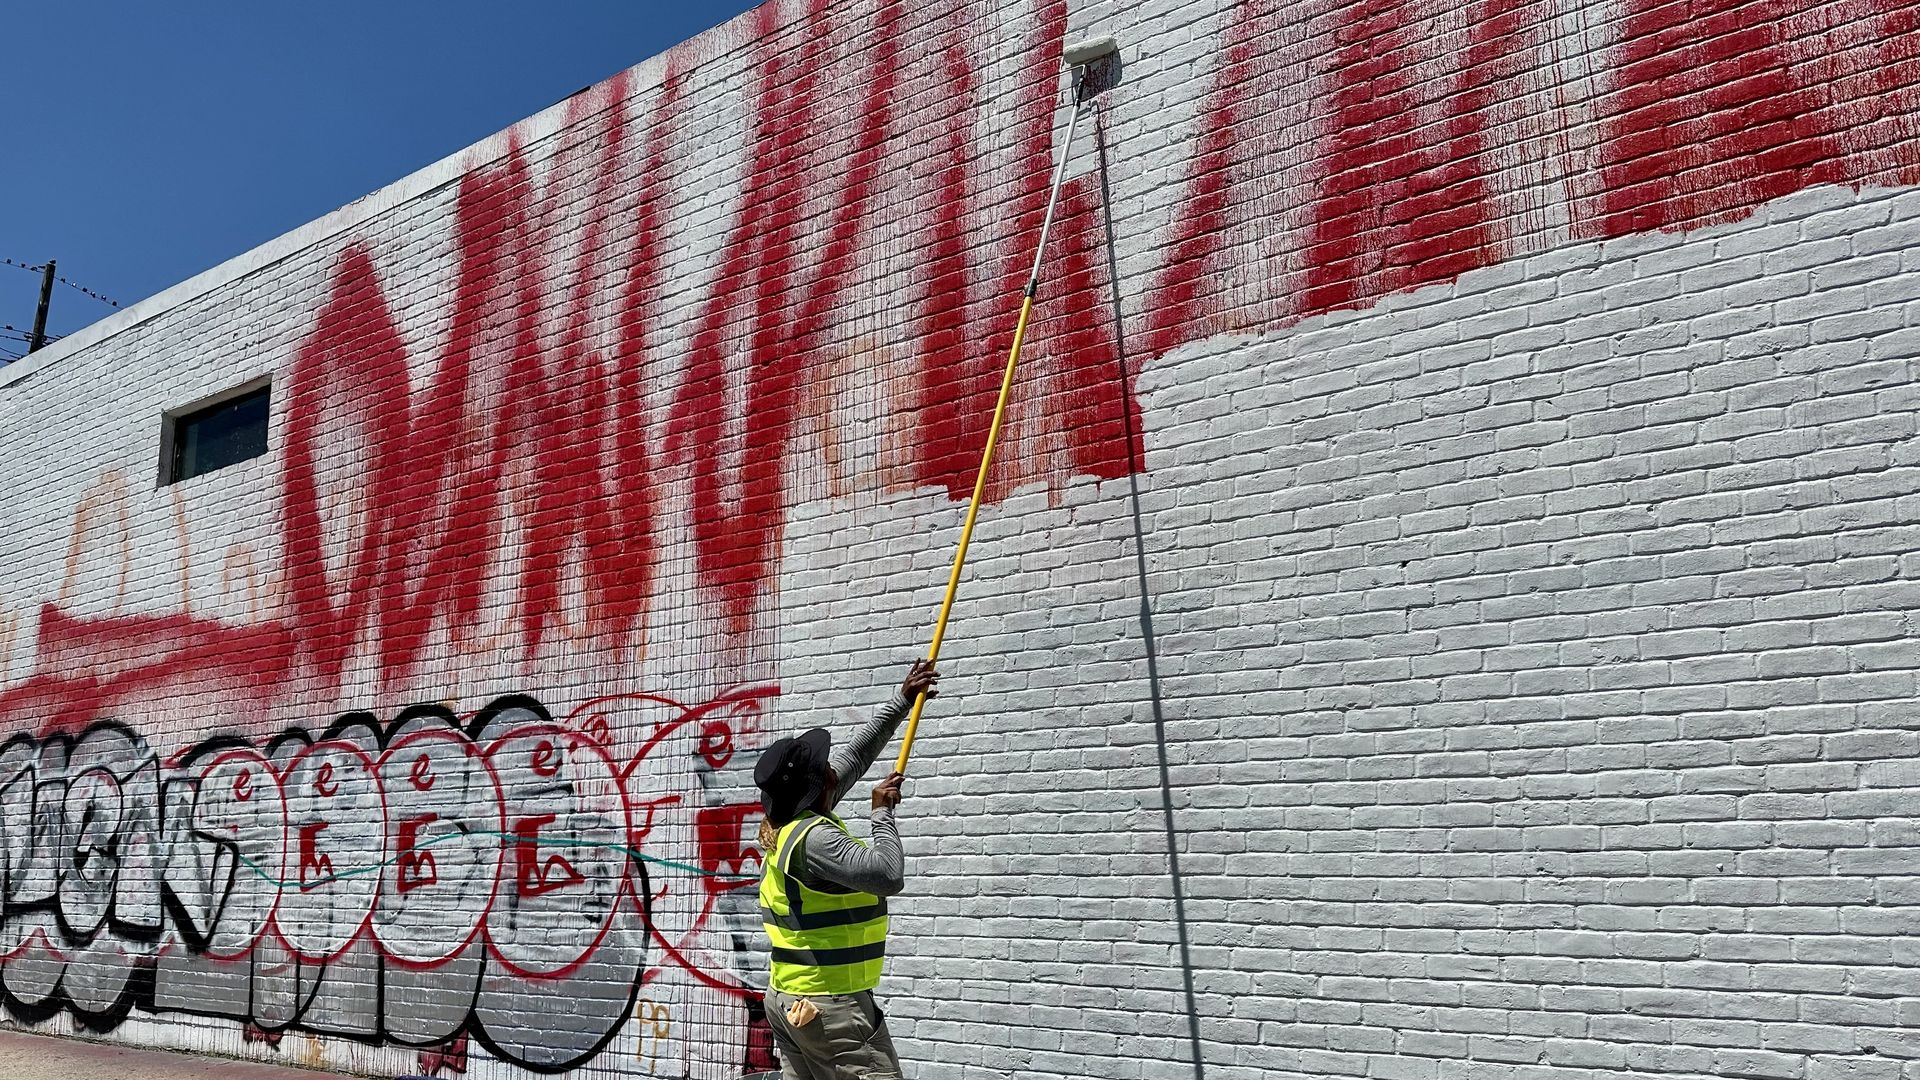 Photo shows a man painting over graffiti on a white wall